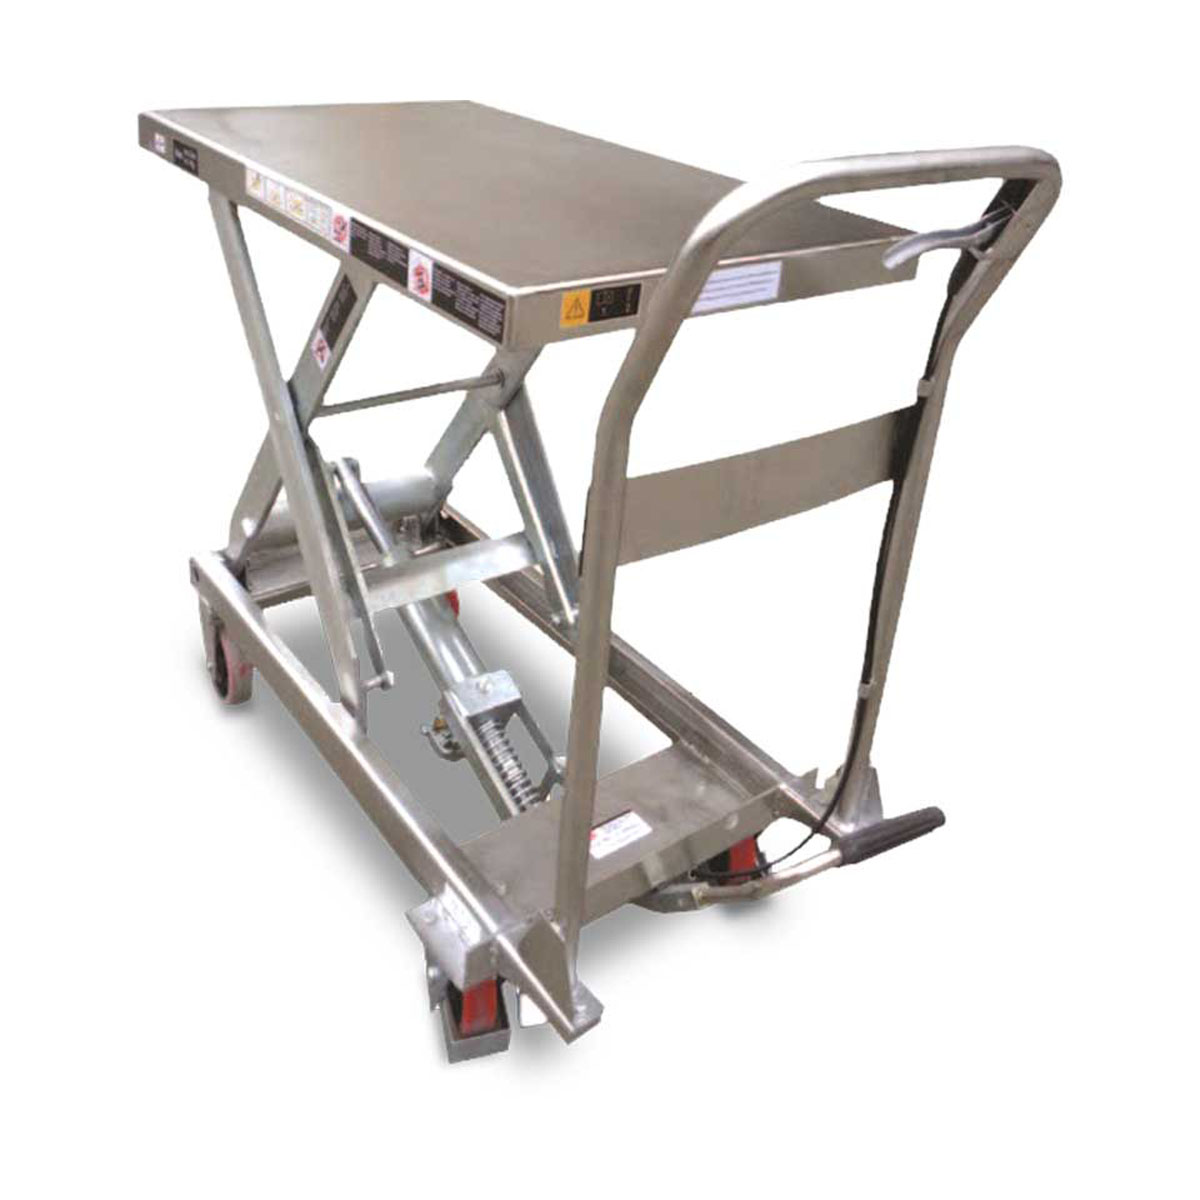 Buy Mobile Scissor Lift Trolley (Stainless Steel) in Mobile Lift Tables from Astrolift NZ